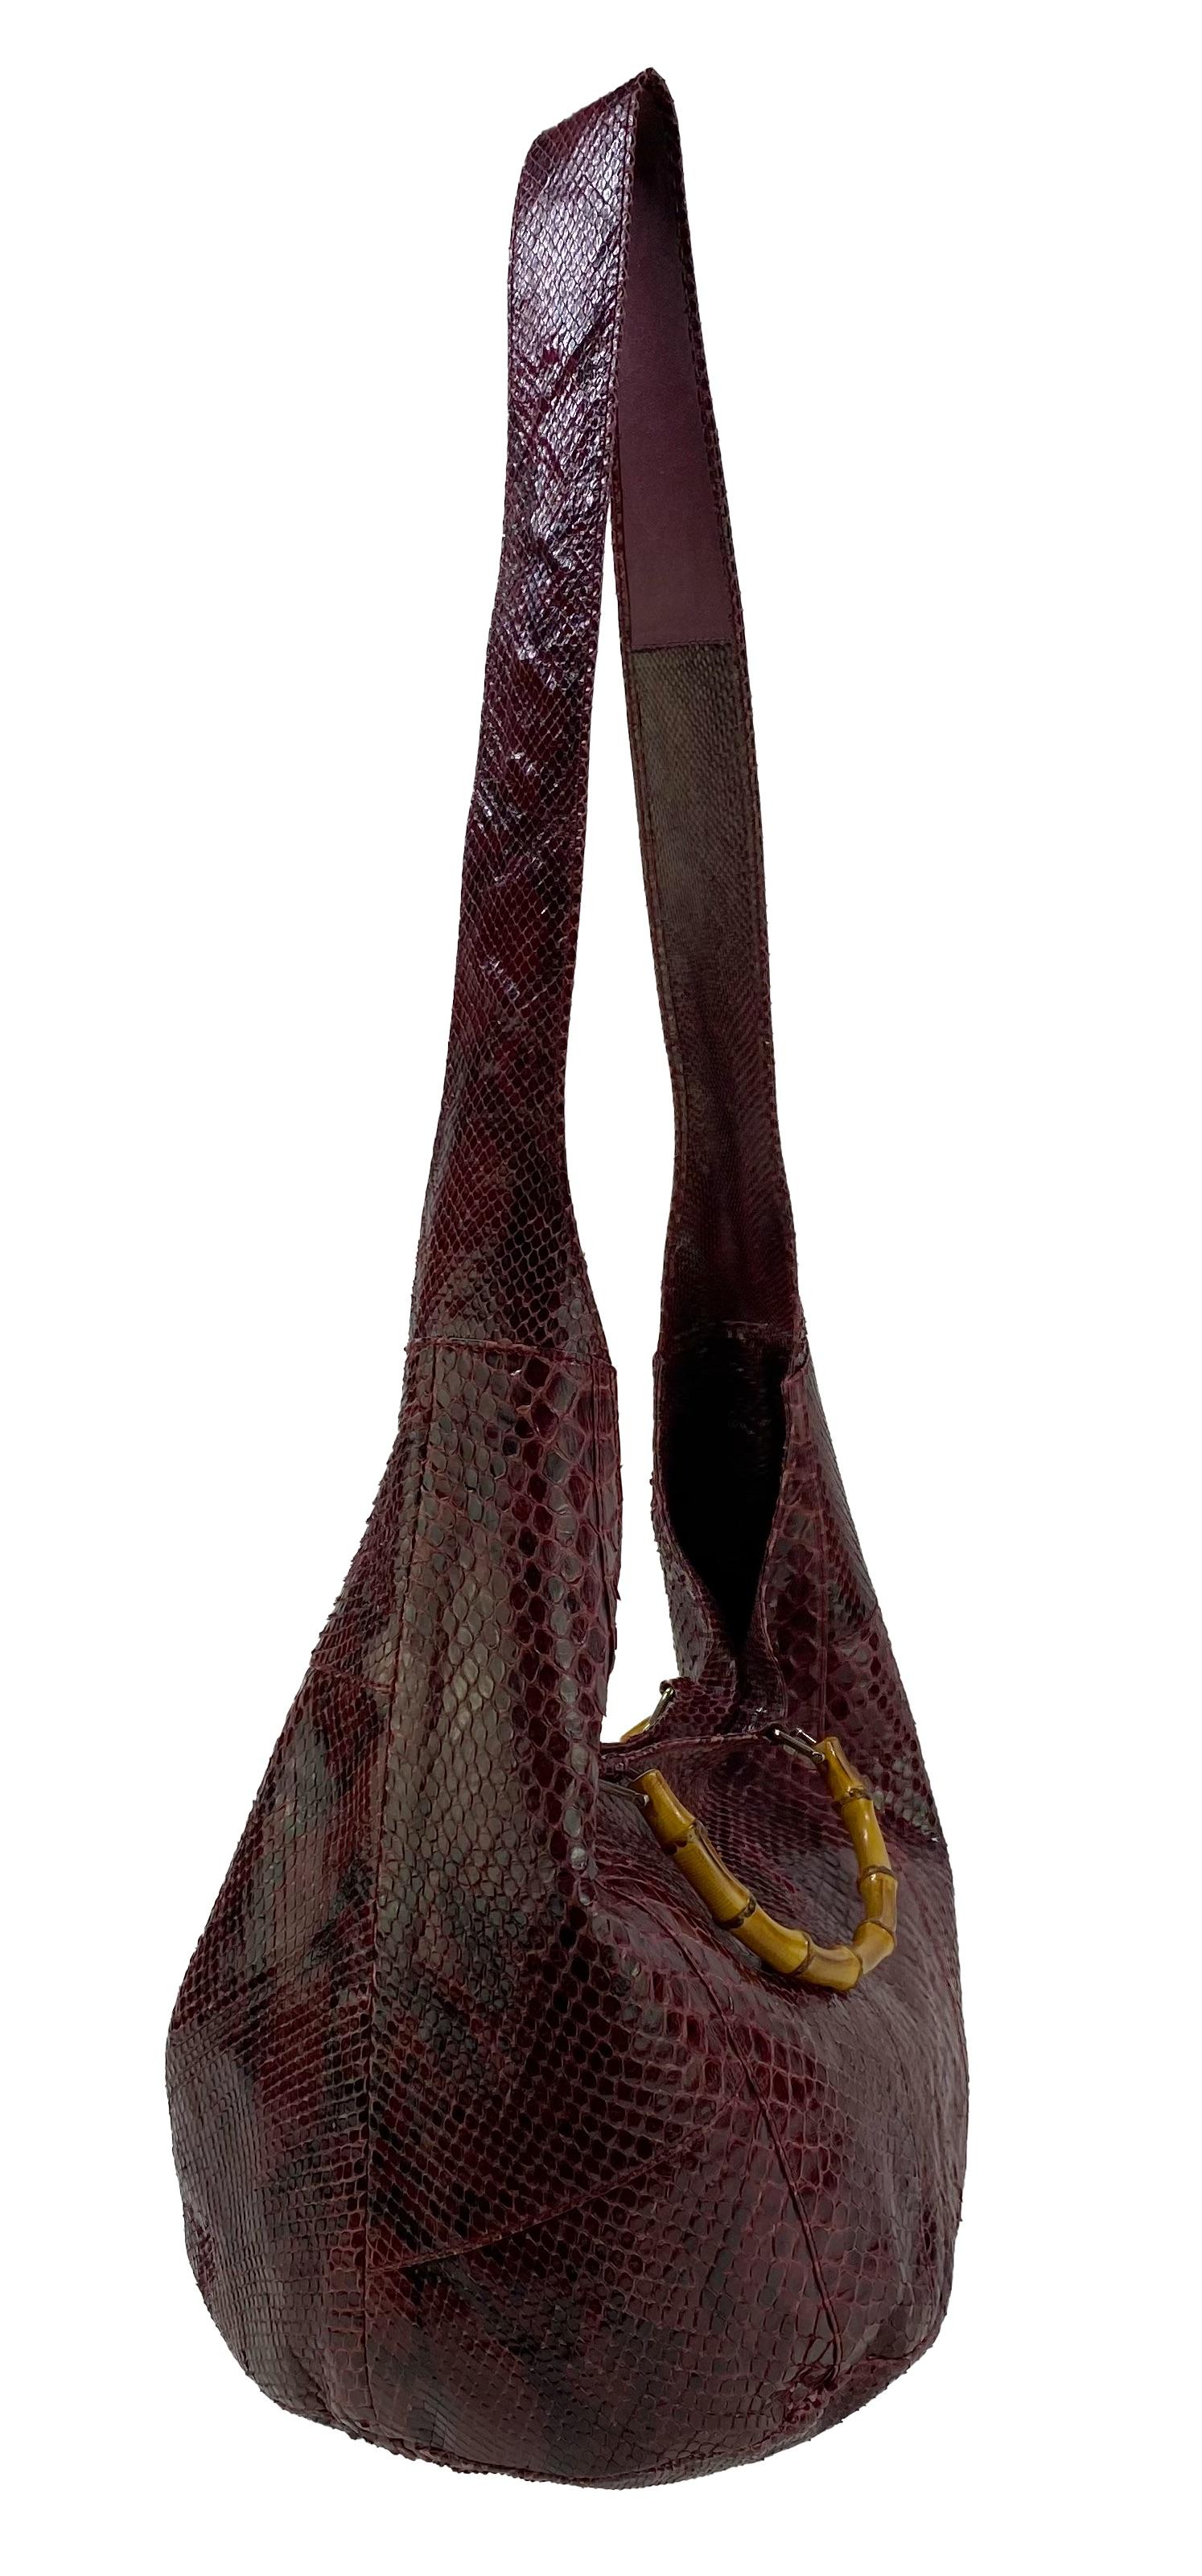 S/S 1996 Gucci by Tom Ford Kate Moss Burgundy Python Bamboo Crossbody Bag Runway In Good Condition In West Hollywood, CA